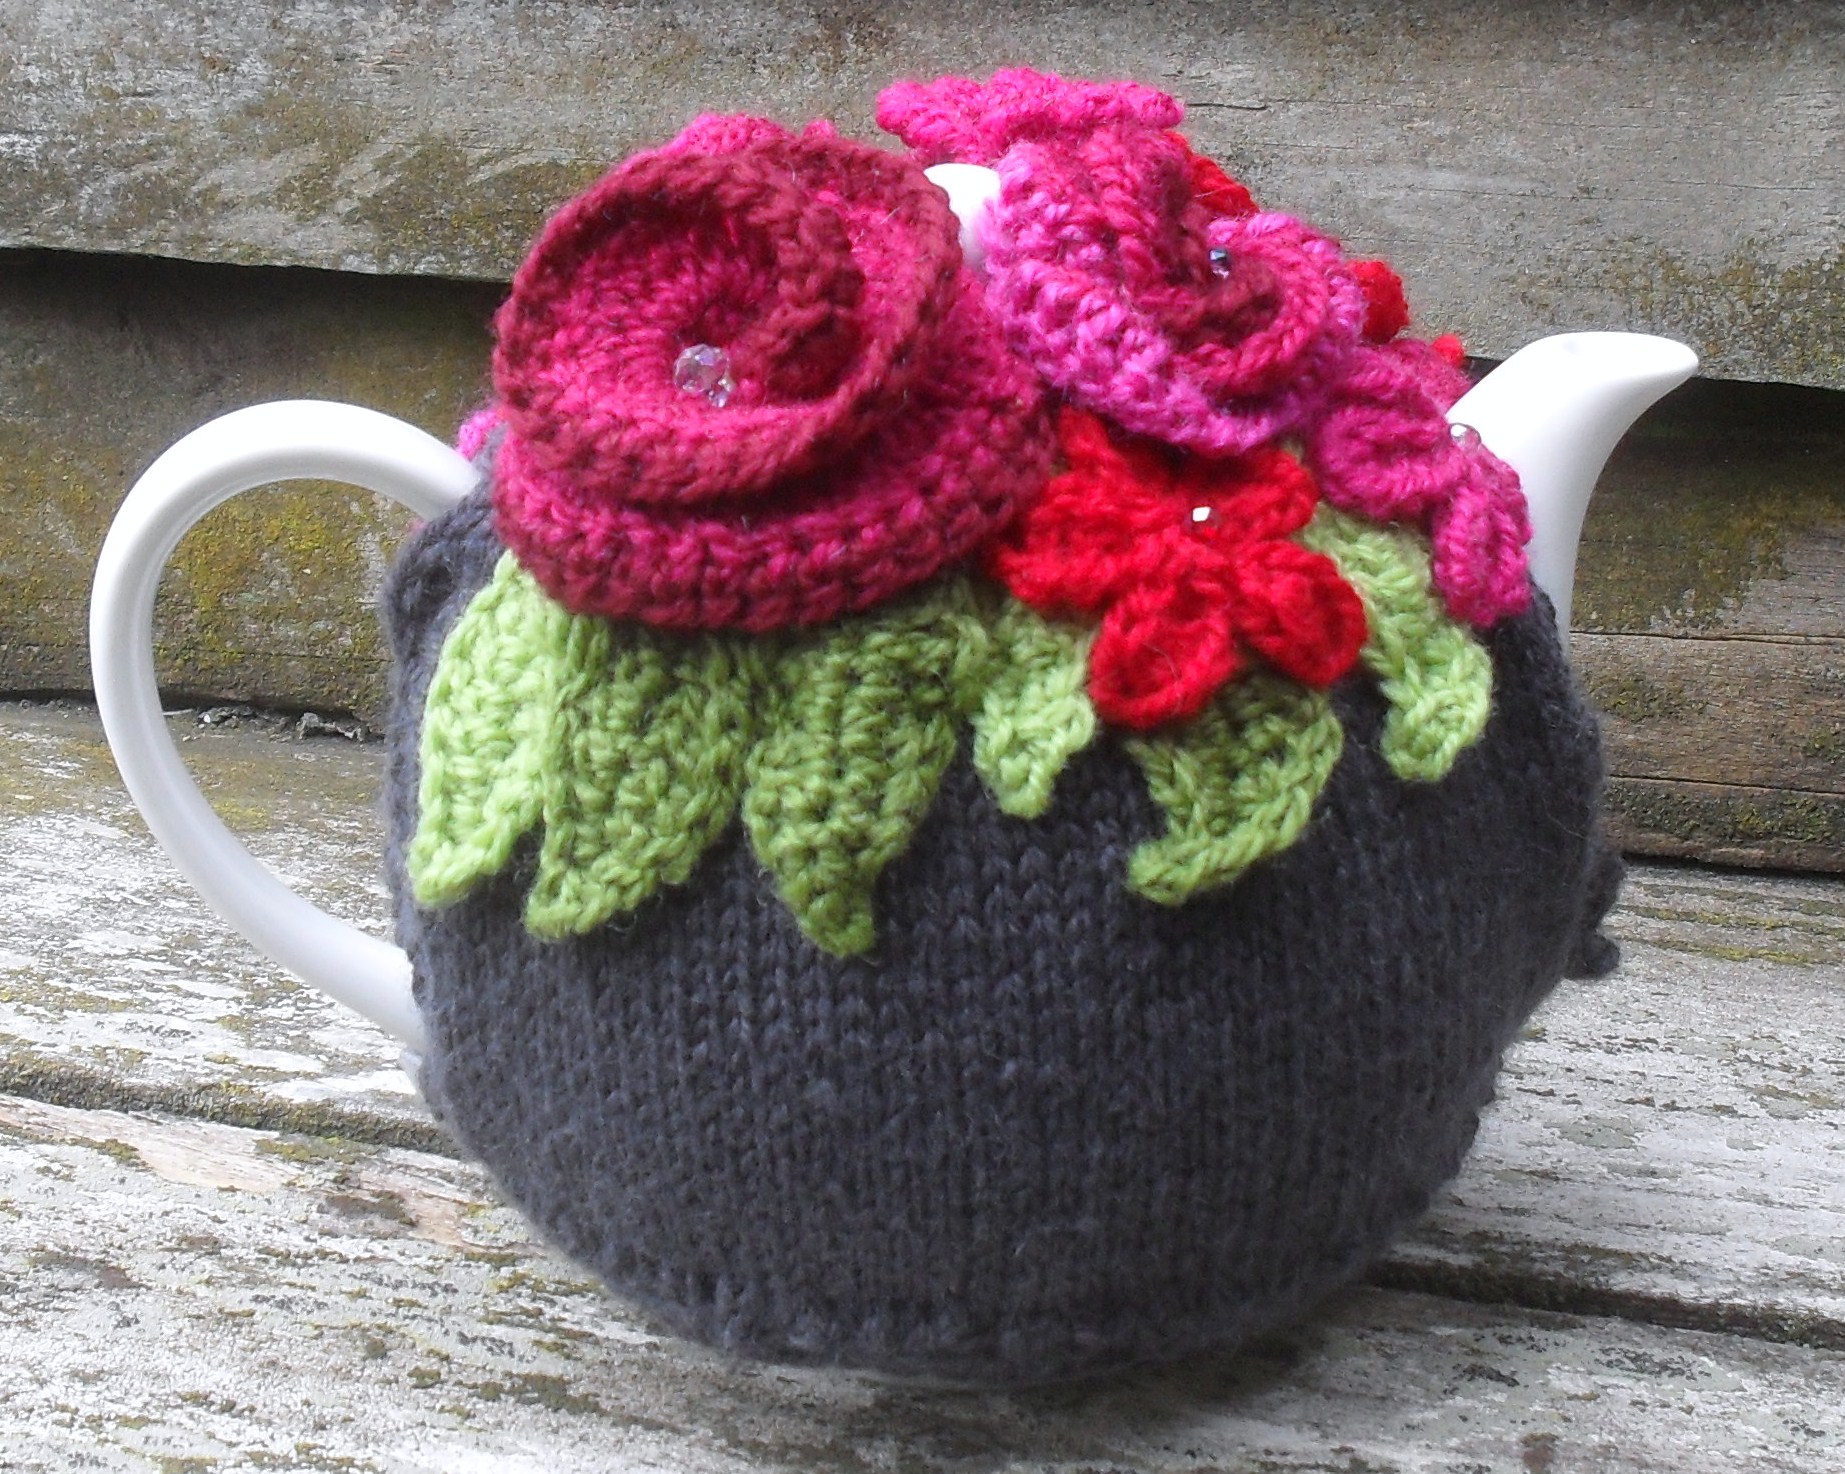 Free Knitting Patterns to Make Your Own Tea Cozies | Spinning